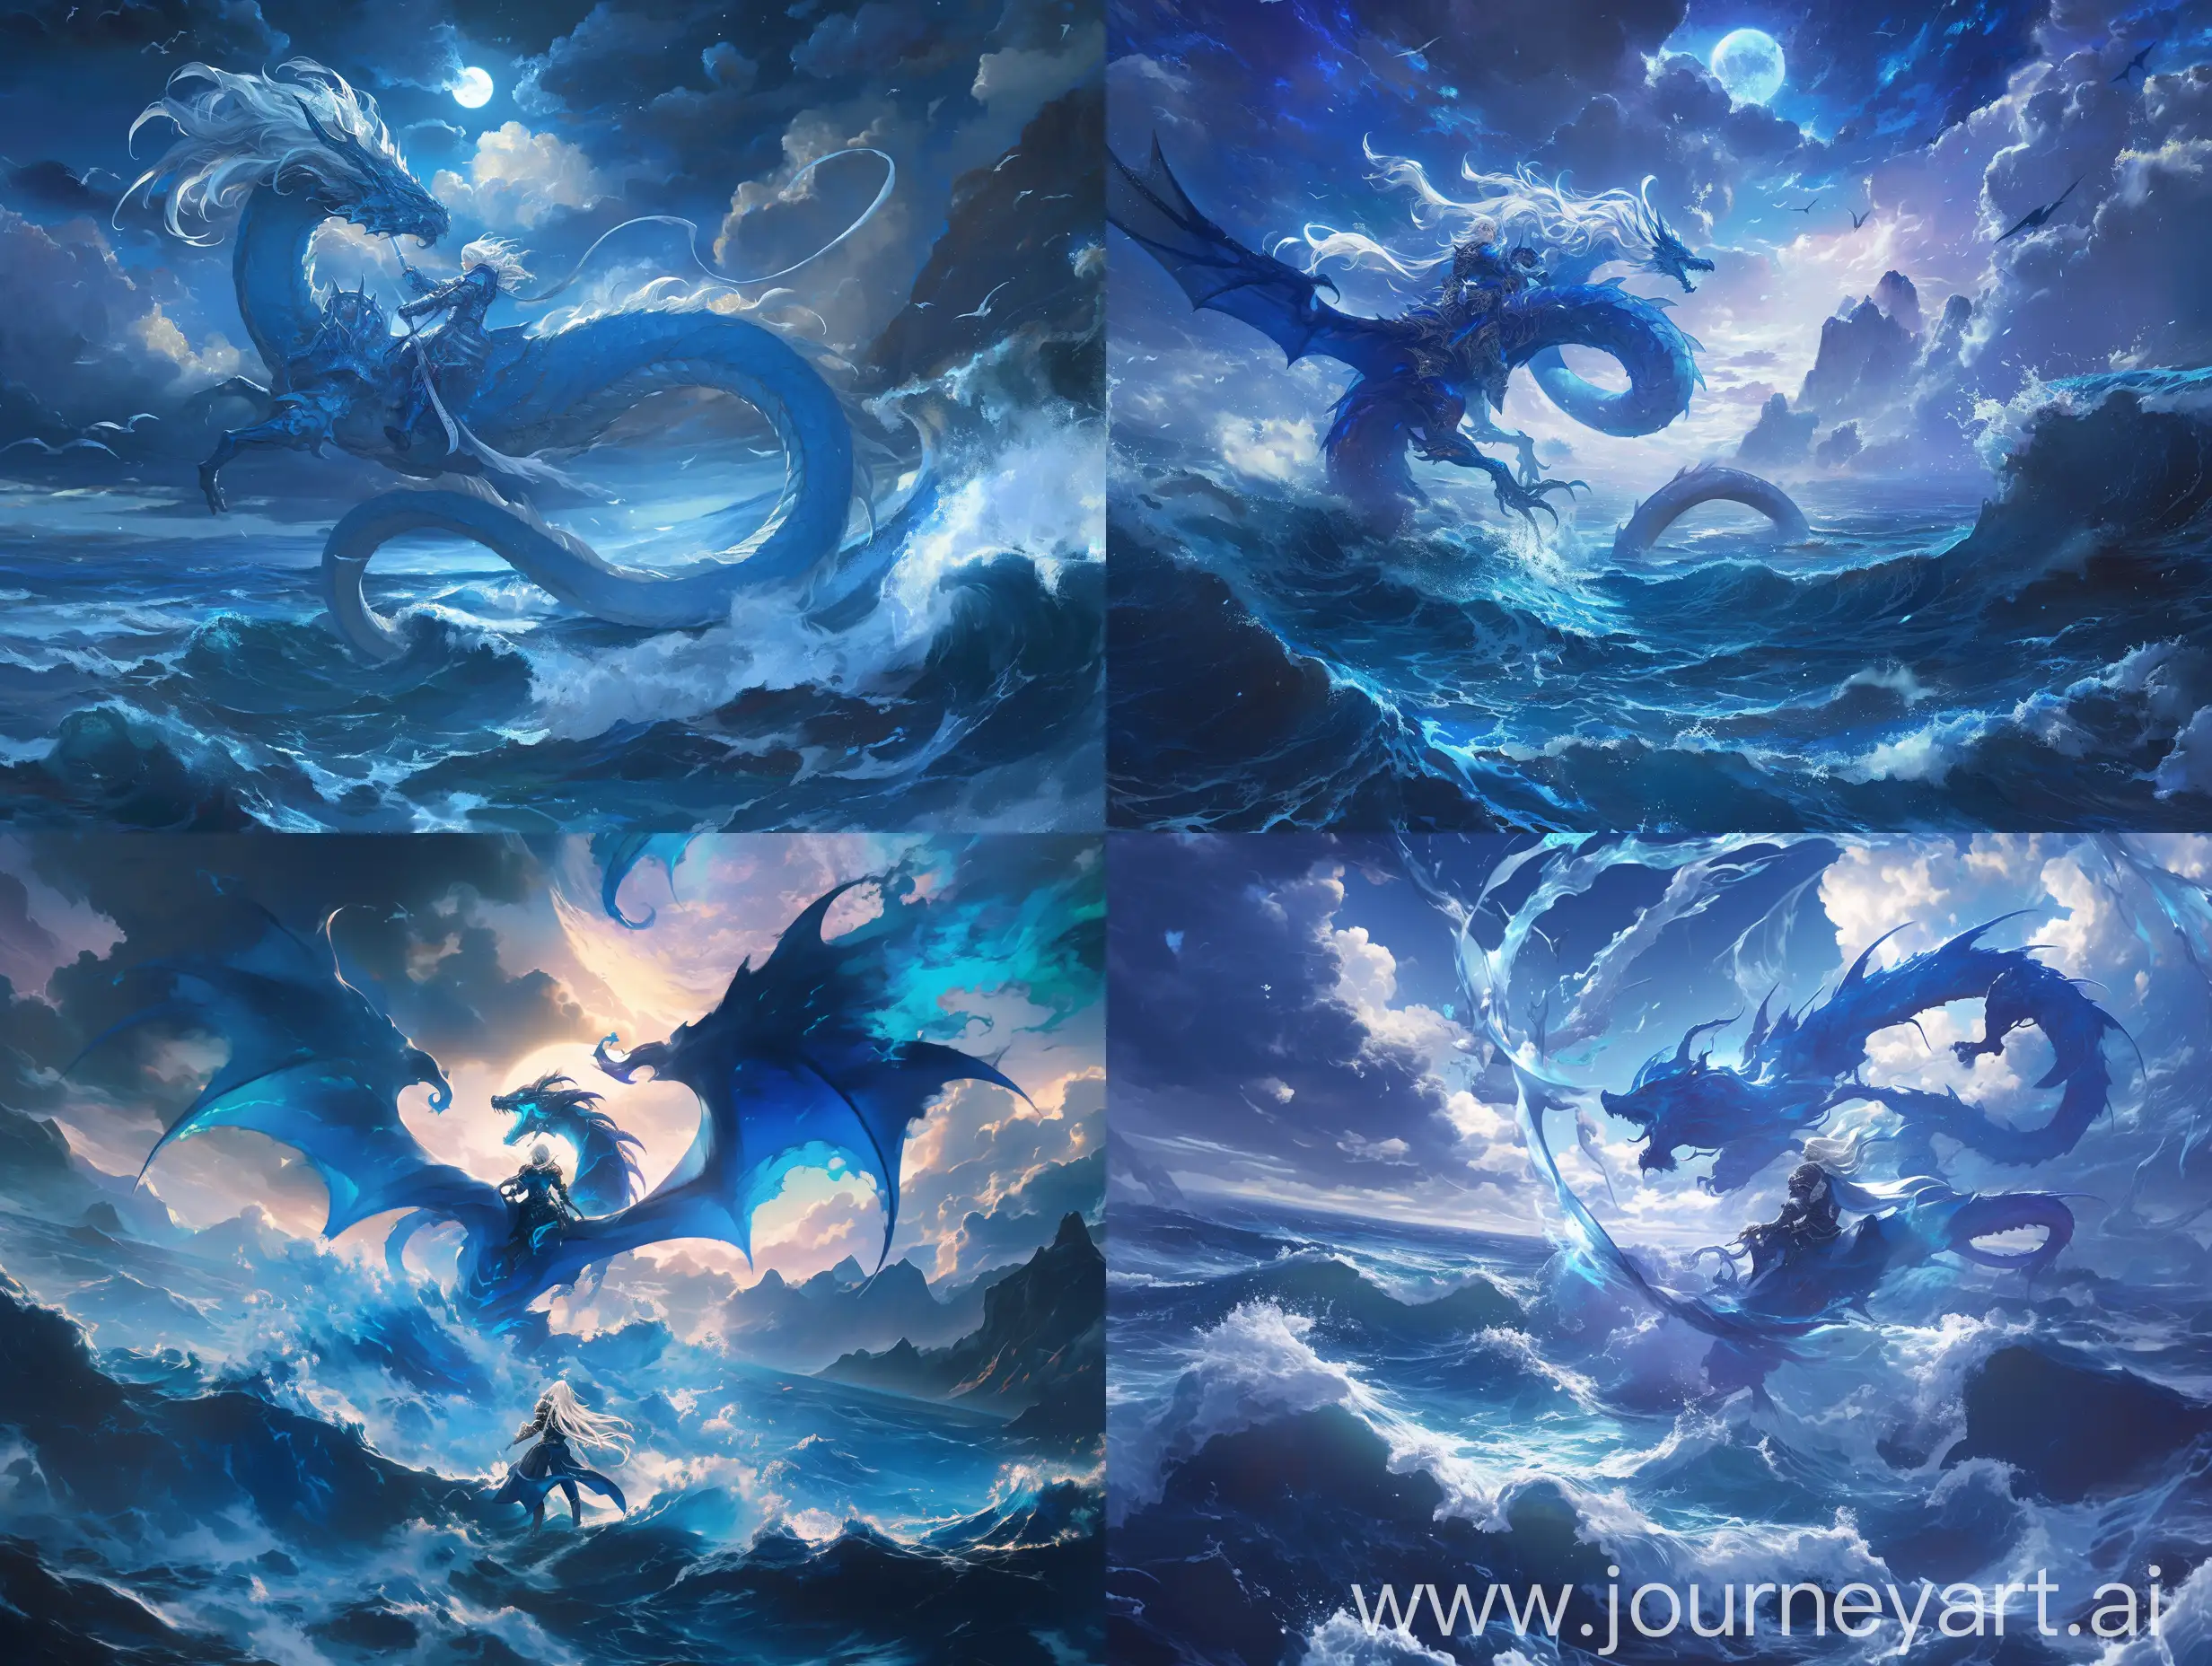 WhiteHaired-Warrior-Riding-Blue-Dragon-Amidst-Swirling-Storm